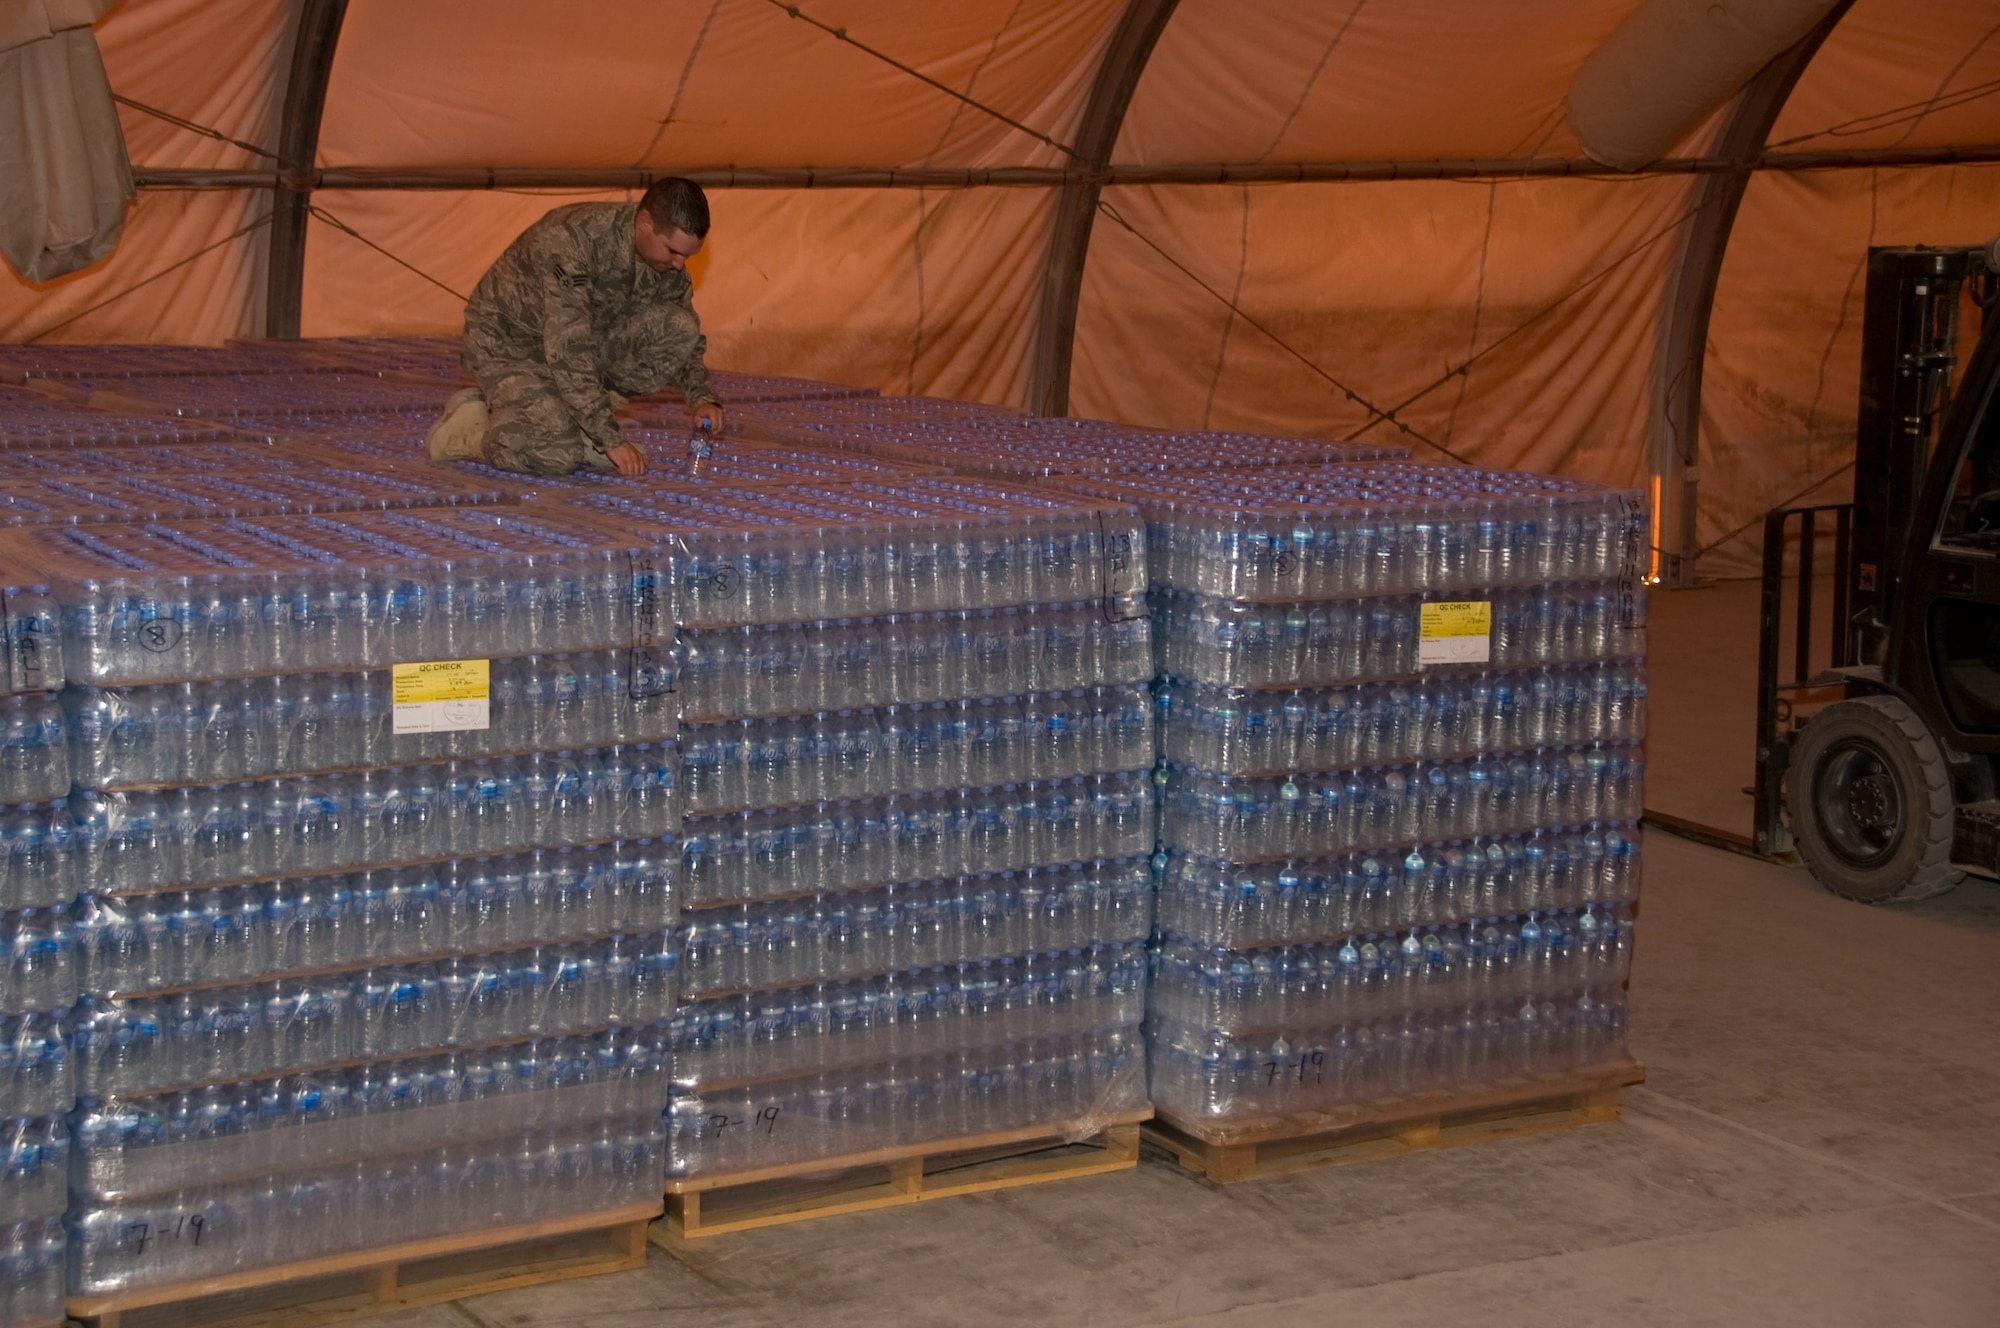 Senior Airman Ryan Smith, 379th Expeditionary Medical Group Bioenvironmental environmental program manager, pulls a random bottle of water from a pallet of water with a specific production date. Smith pulls and tests random bottles from every shipment of water to ensure all water is free of any form of bacteria. More than 1.3 million bottles of water are consumed at this installation every month. (U.S. Air Force photo/Senior Airman Bryan Swink)